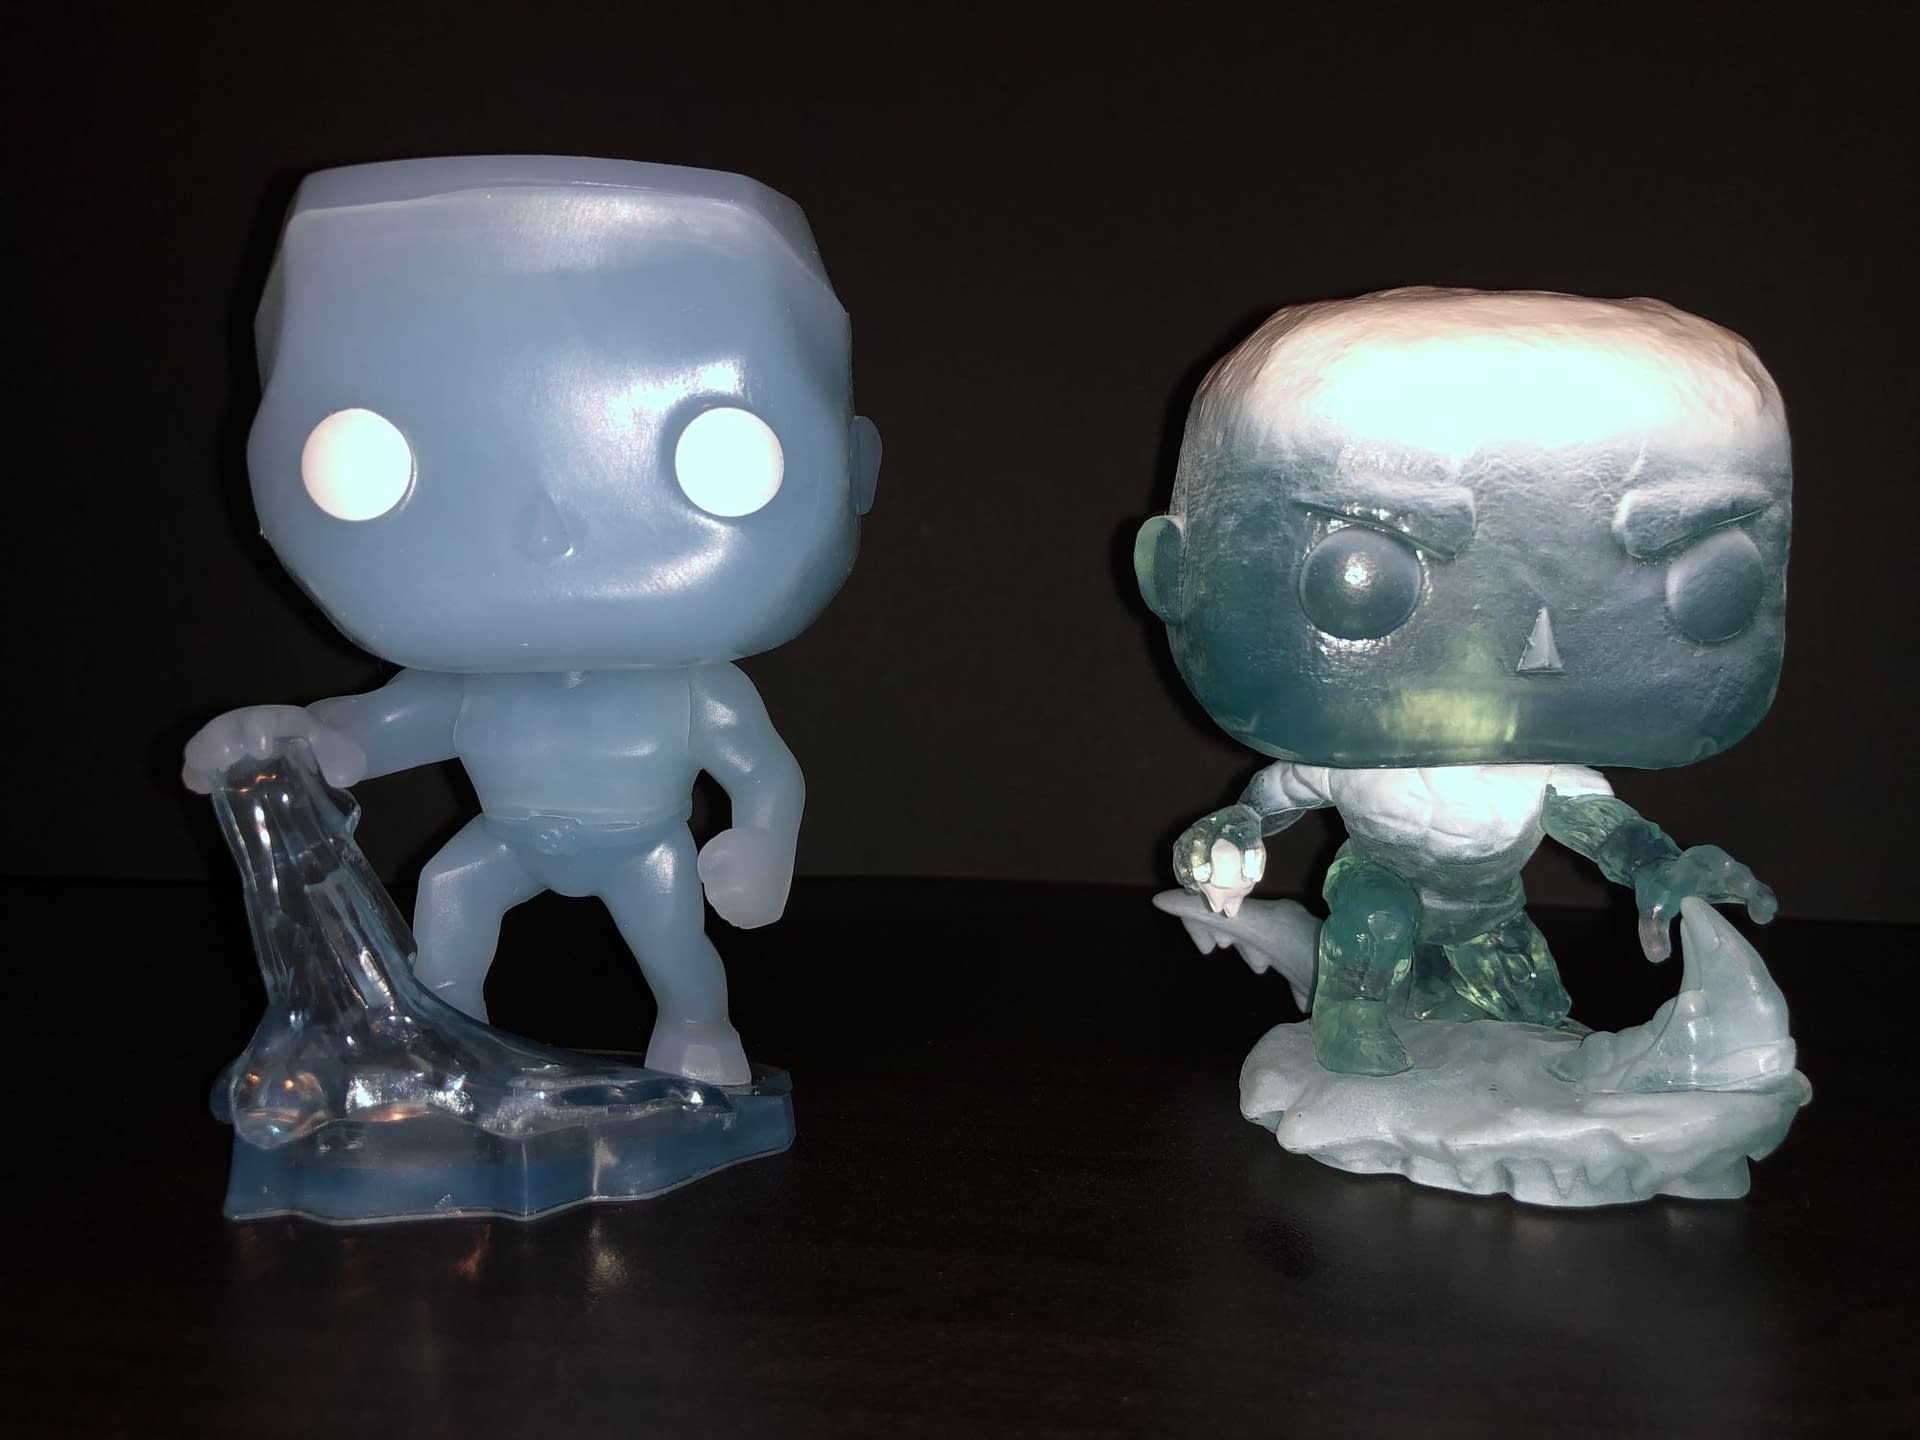 Iceman Gets Frosty with Marvel 80th Anniversary Funko Pop [Review]